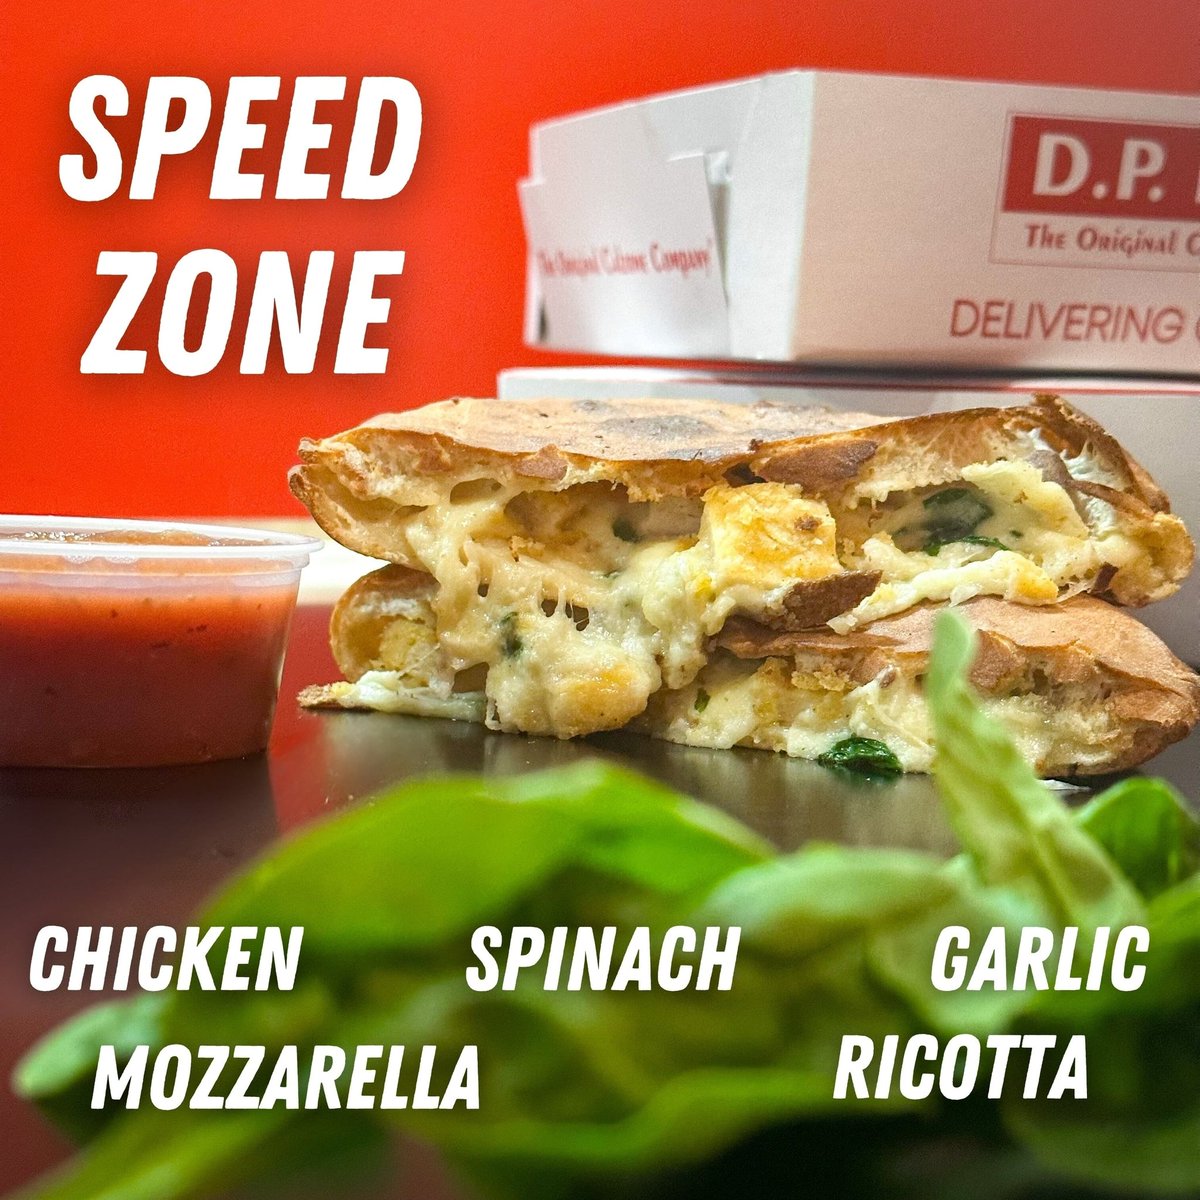 Have you tried our Speed Zone yet? 😋🤤

Order your favorites from #dpdoughypsilanti at dpdough.com!

We are OPEN CRAZY LATE & don't forget delivery is our specialty!

#ypsi #easternmichigan #easternmichiganuniversity #ypsireal #ypsilantimichigan 
#EMUEagles #calzones